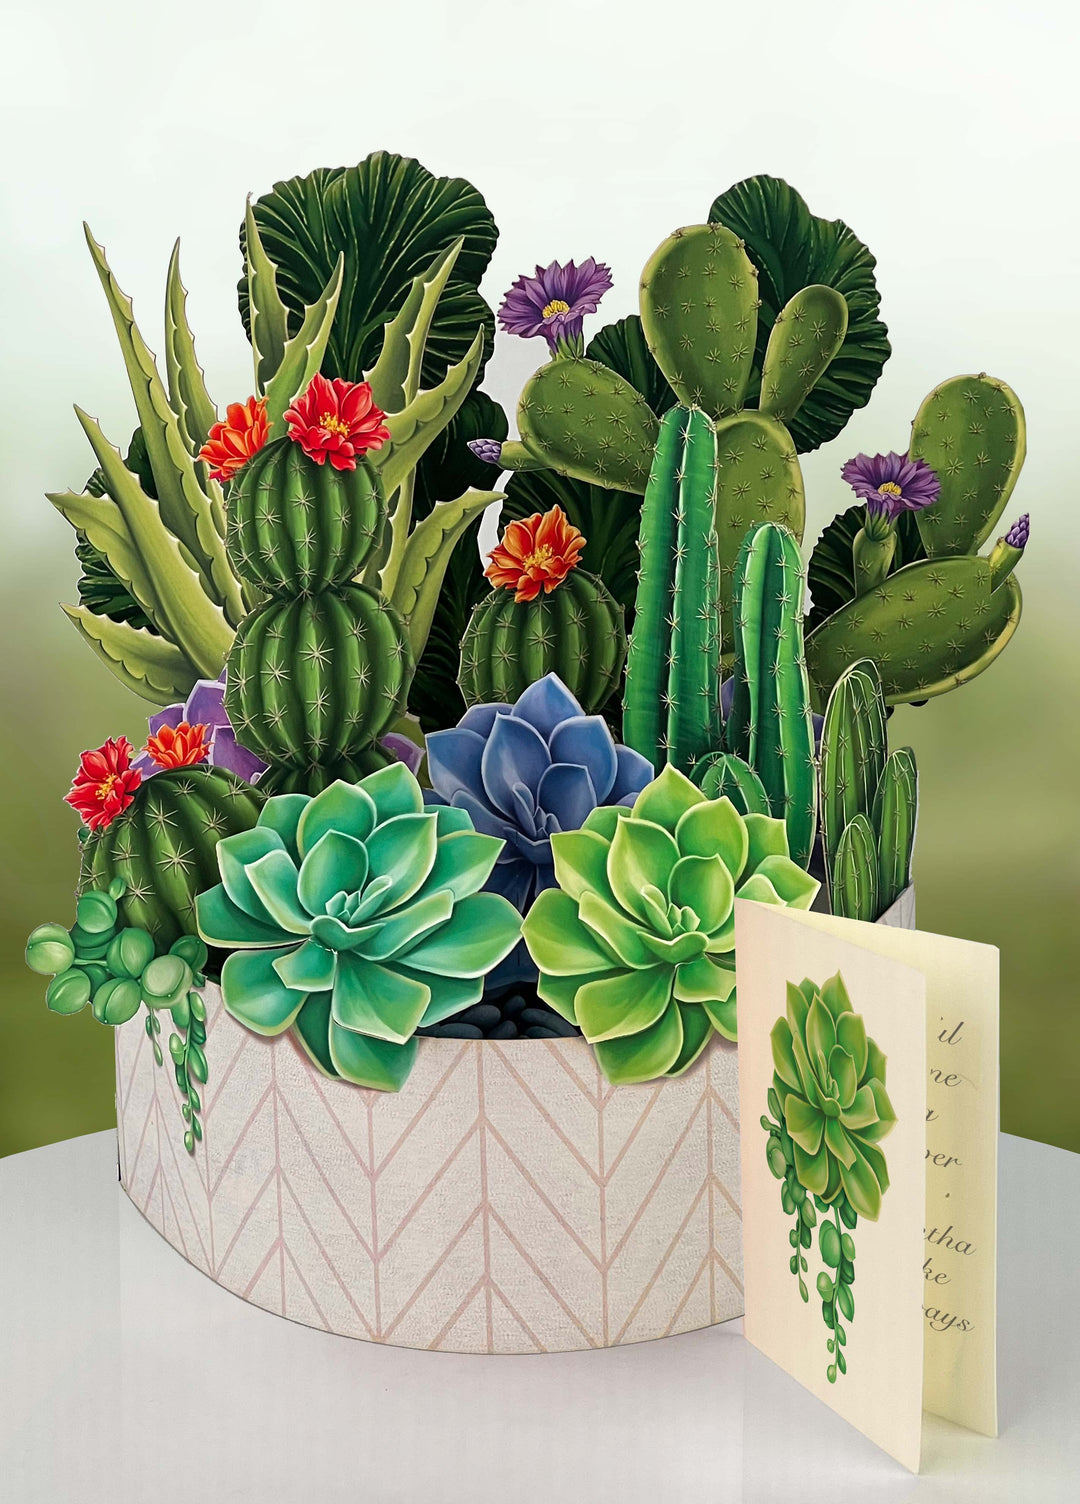 FreshCut Paper "Cactus Garden" measure 12'' tall by 9" wide. Our stunning life sized, 3D pop up flowers include paper vase, matching note card and festive mailing envelope.